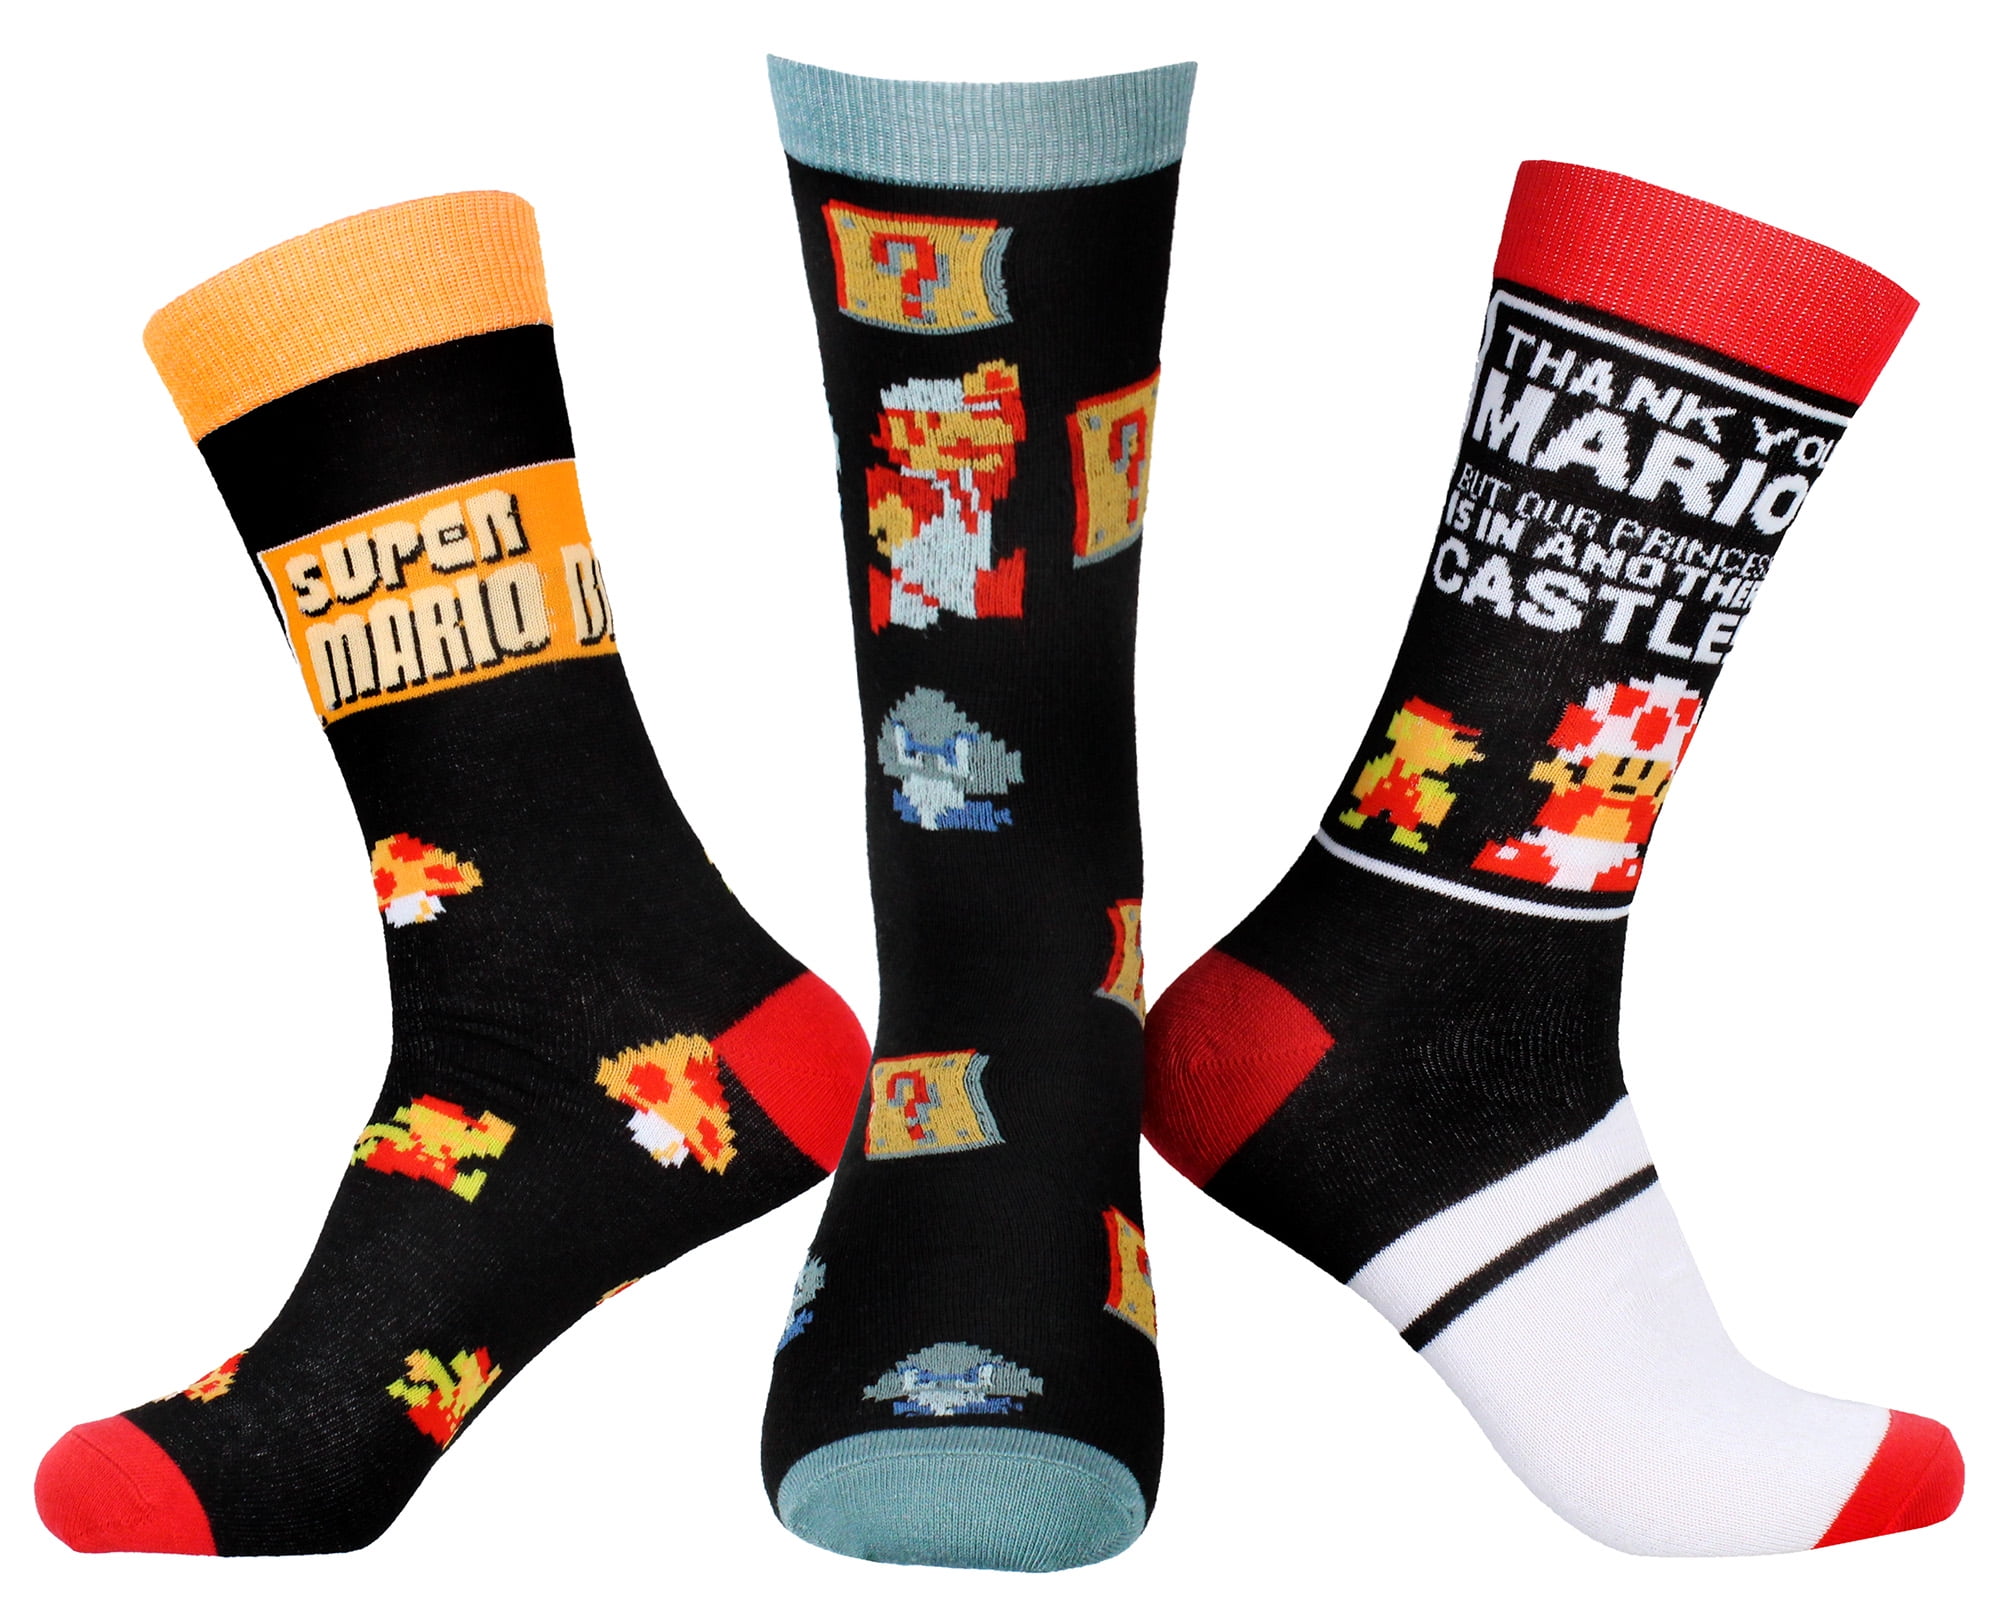 THE MUPPETS ANIMAL "PARTY ANIMAL" PINK Crew Socks UNISEX 